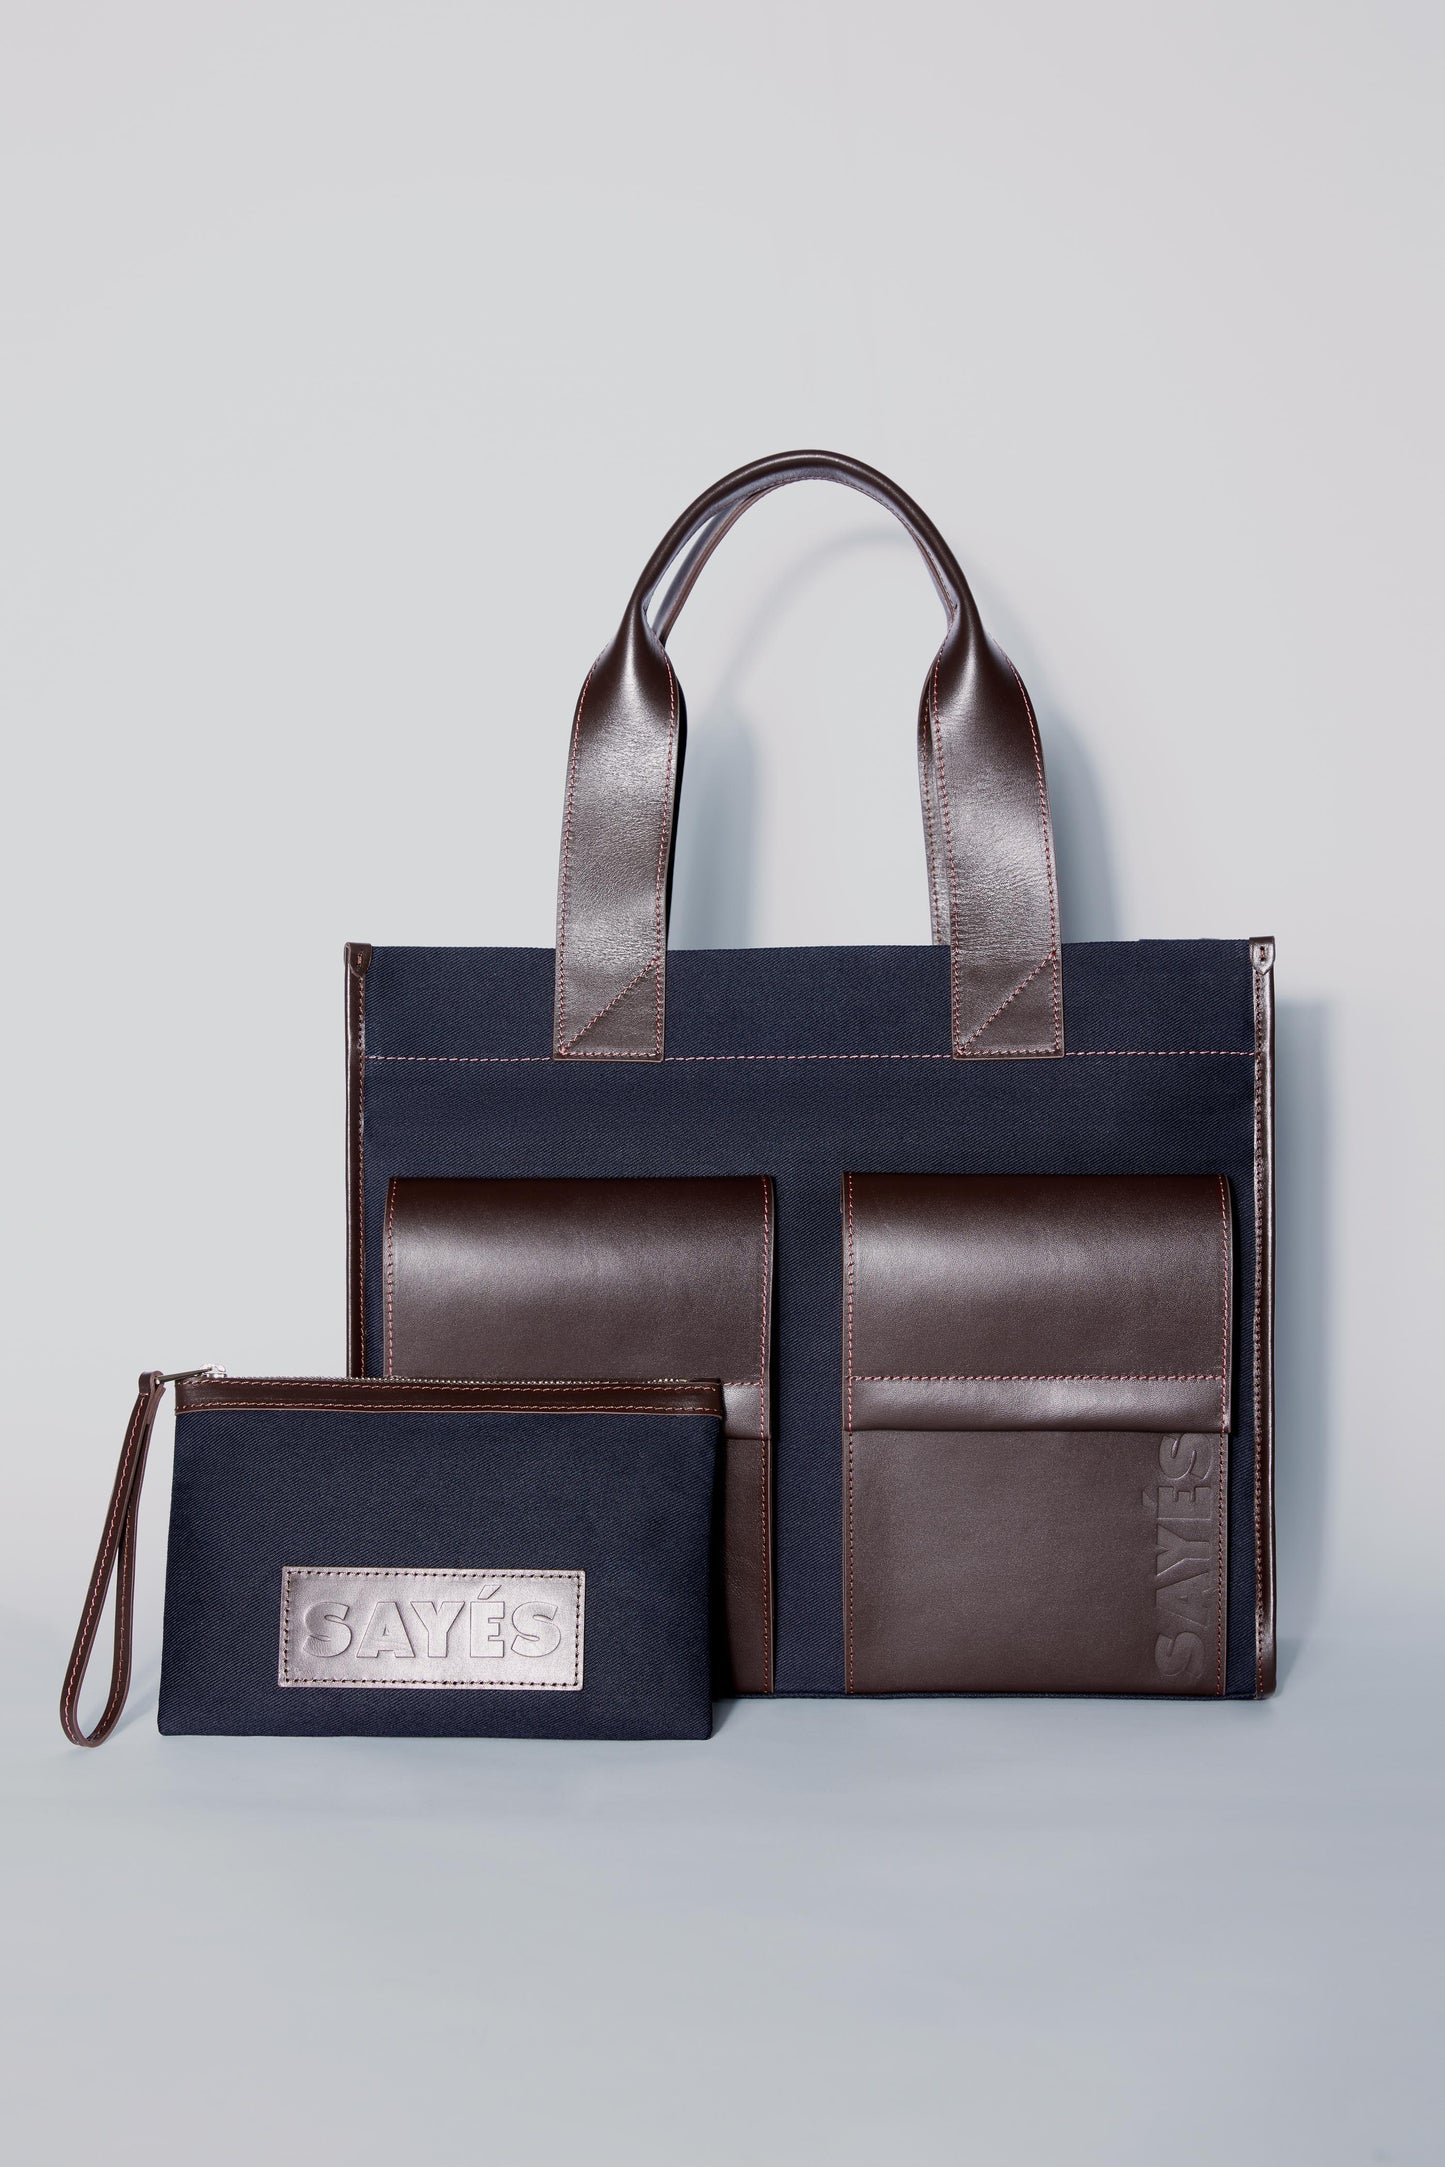 STITCHED POCKET MAXI TOTE IN NAVY AND BROWN